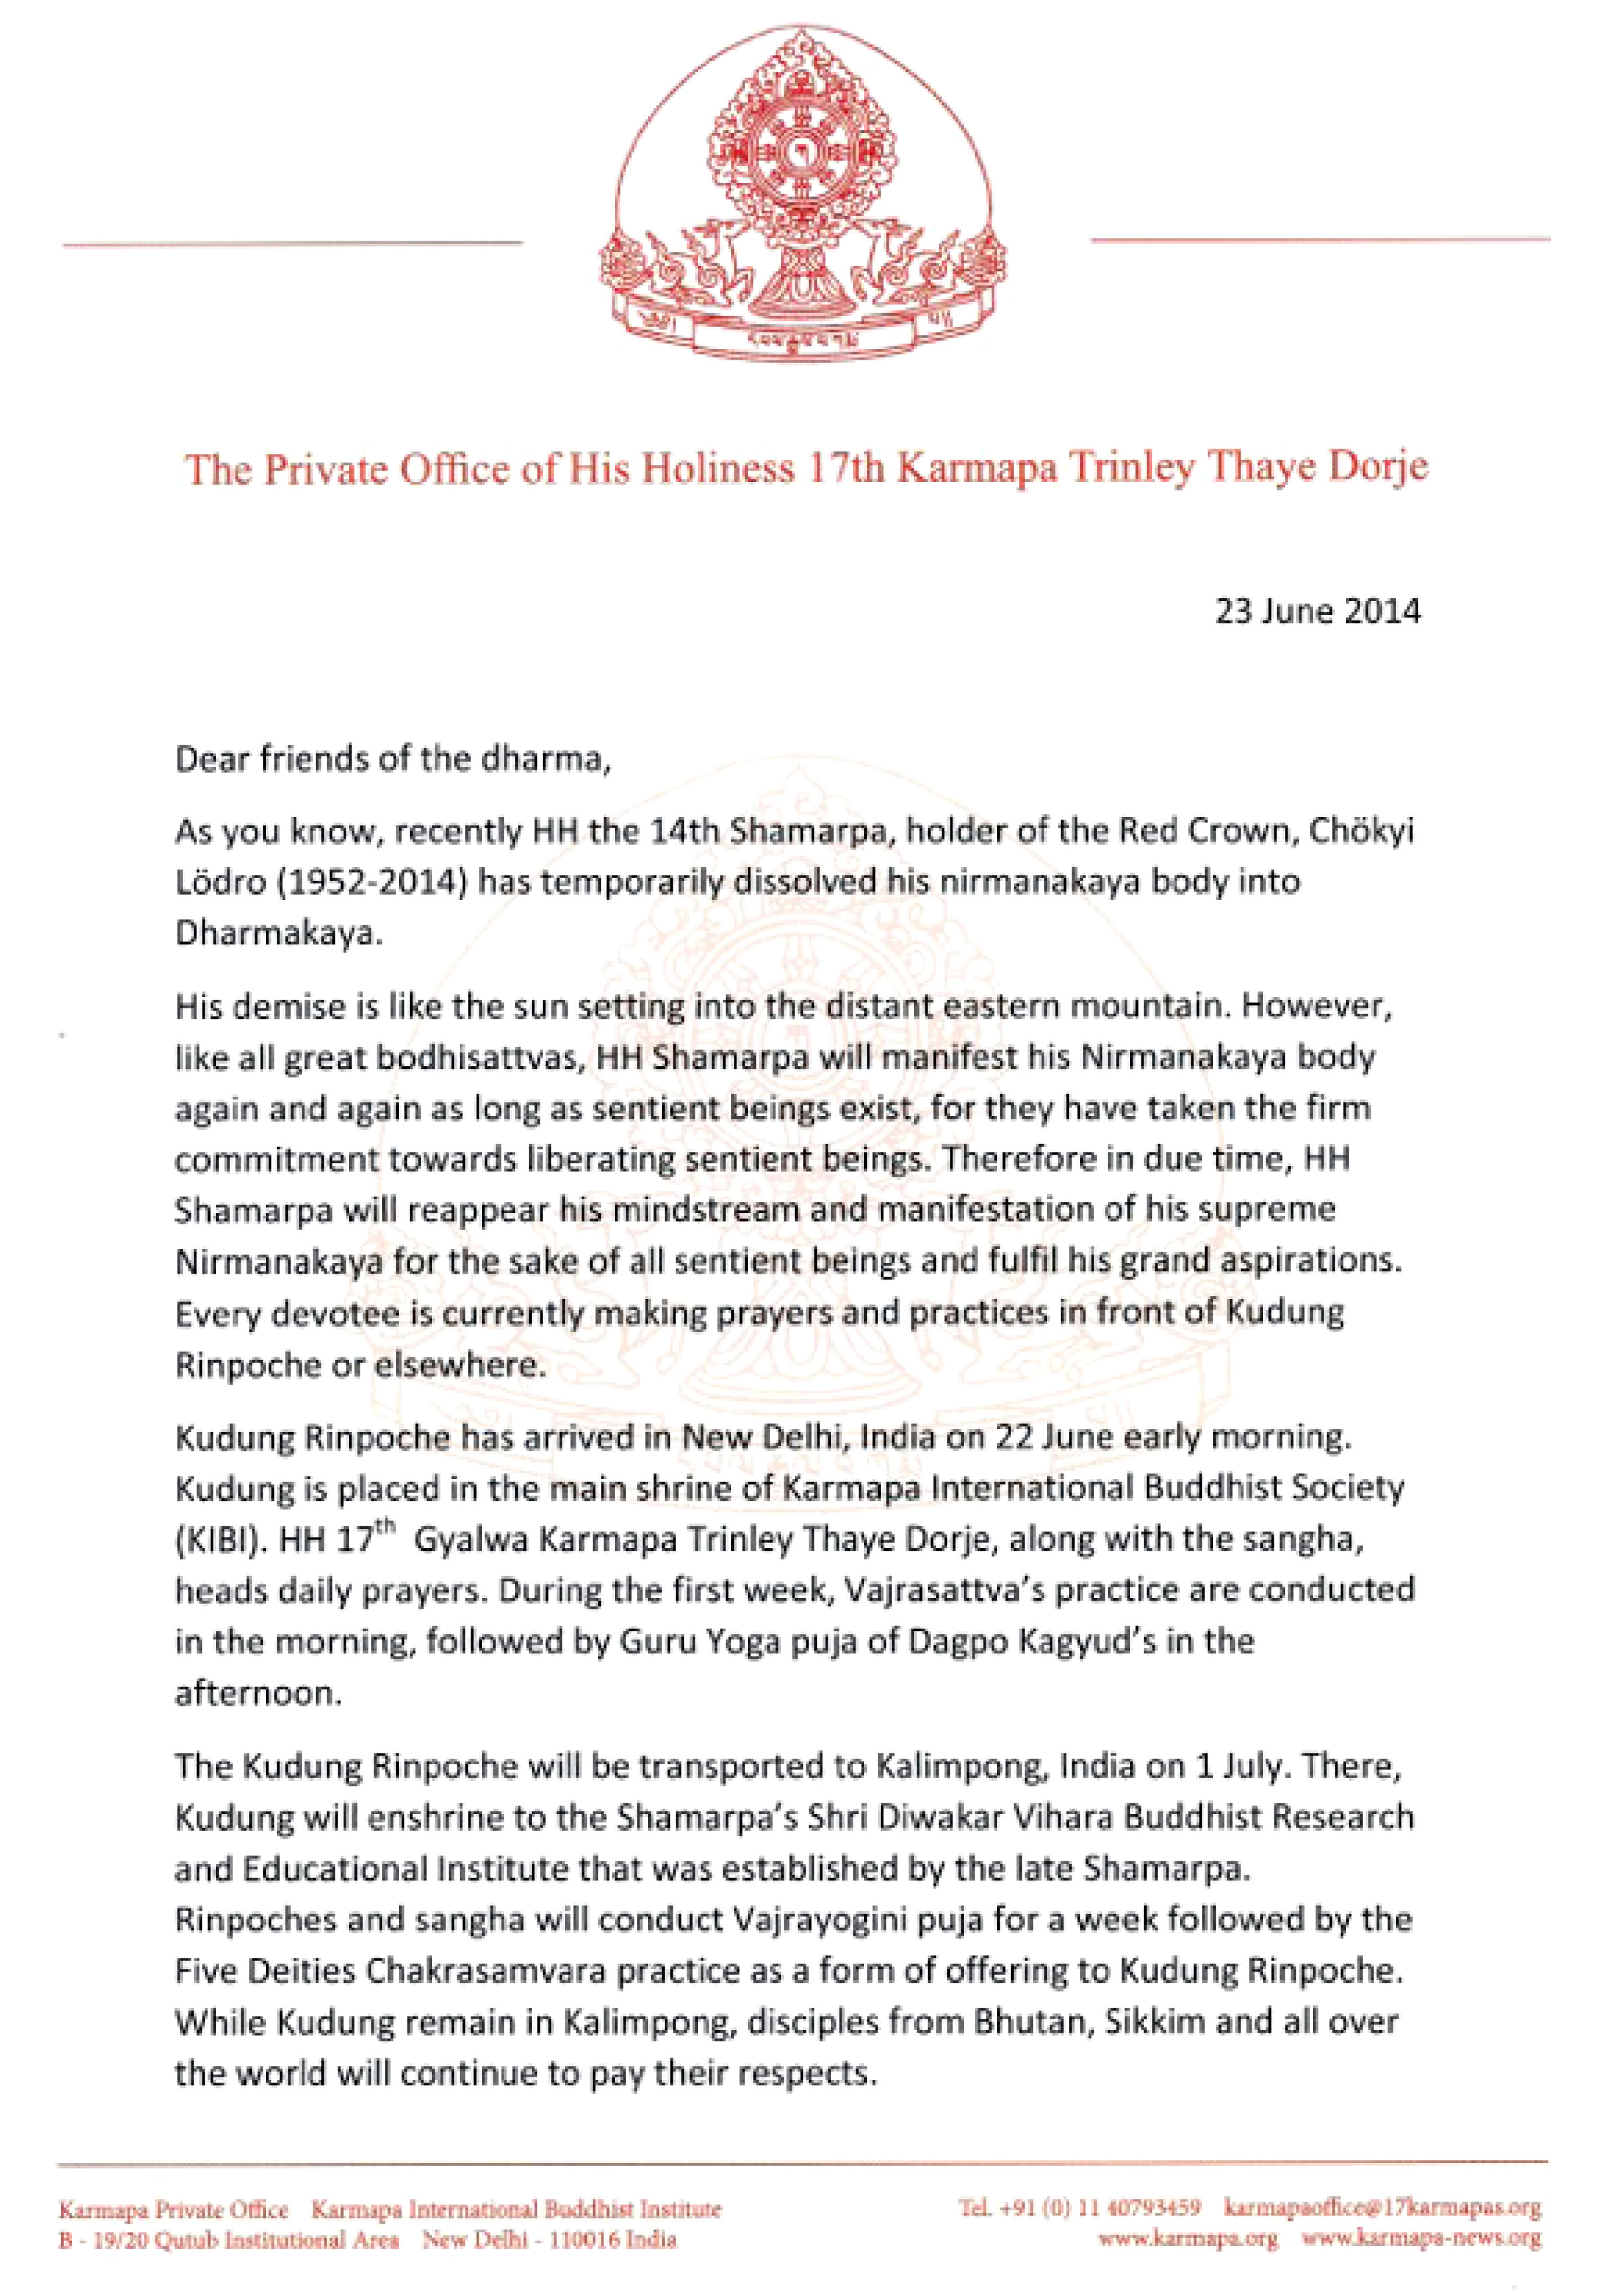 Message from The Private Office of His Holliness 17th Karmapa Trinley Thaye Dorje regarding Kudung Rinpoche - Page 1